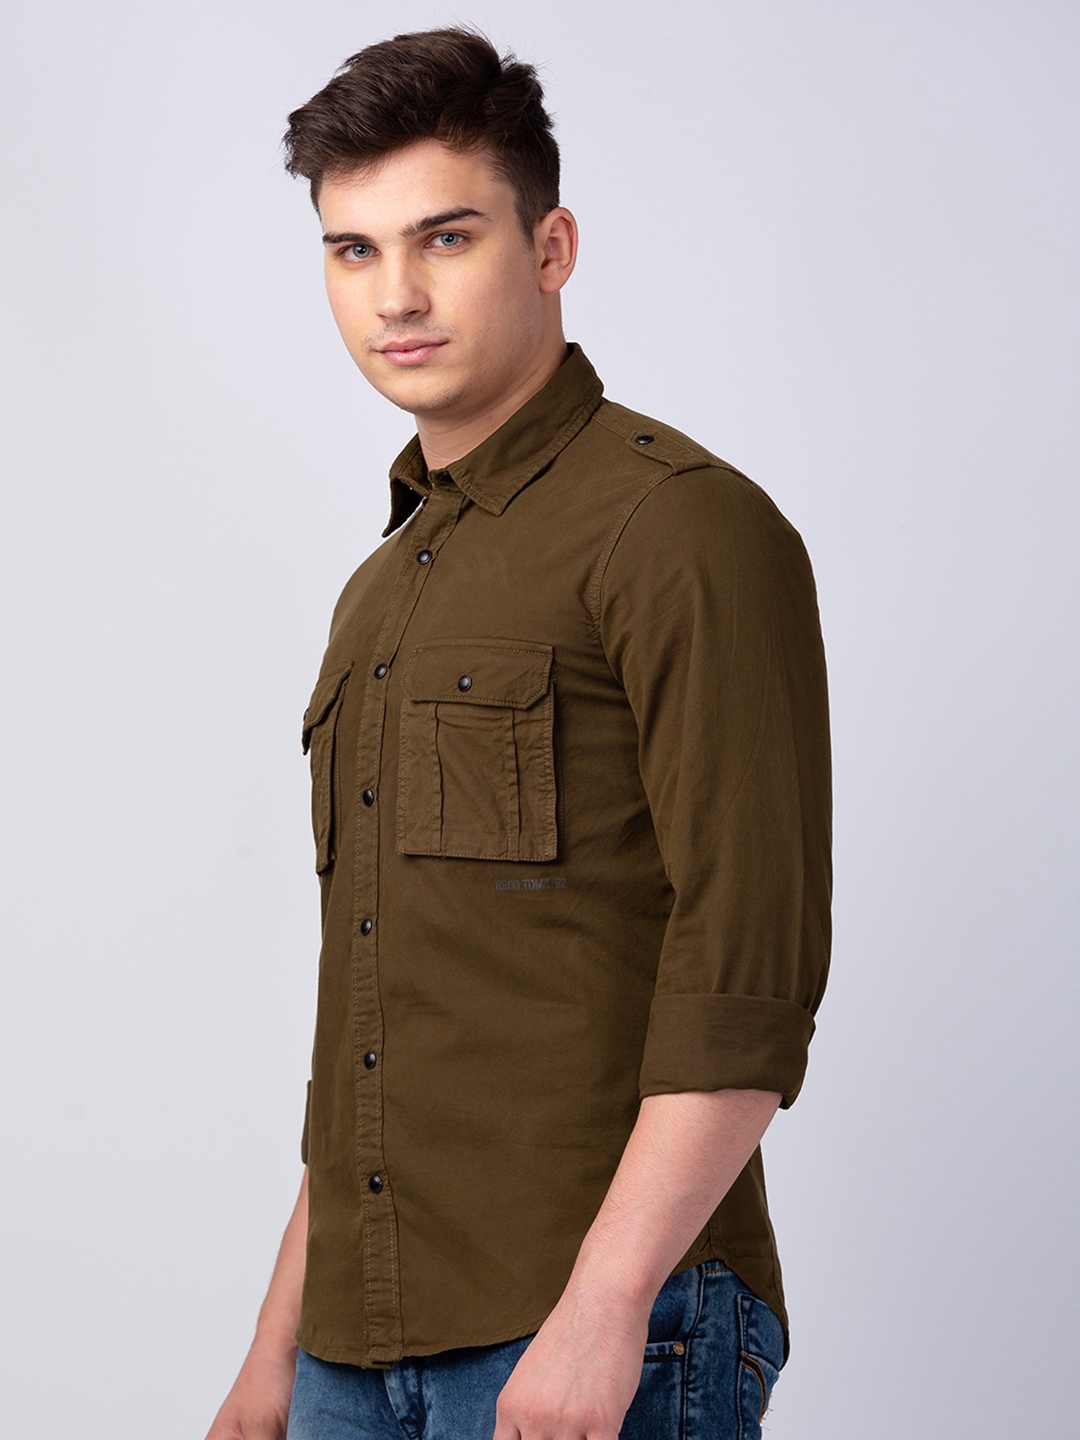 Spykar | Men's Brown Cotton Solid Casual Shirts 3